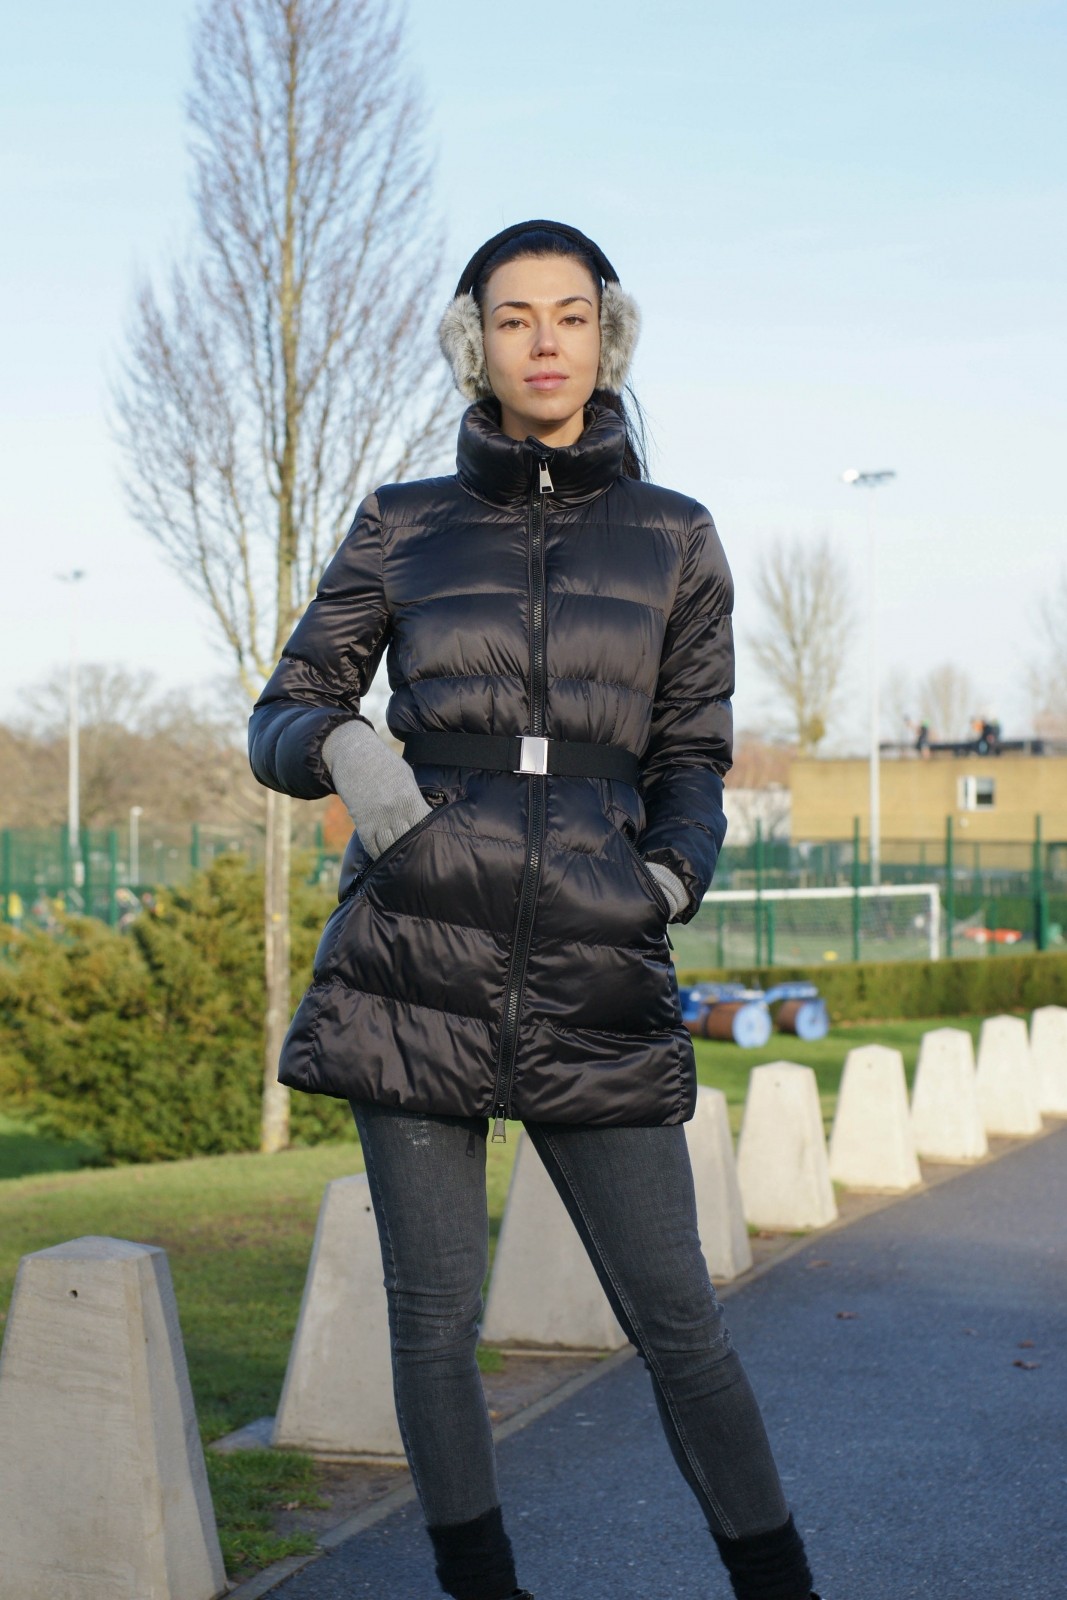 4 Quilted Jacket Styles To Fall In Love With - BRONDEMA